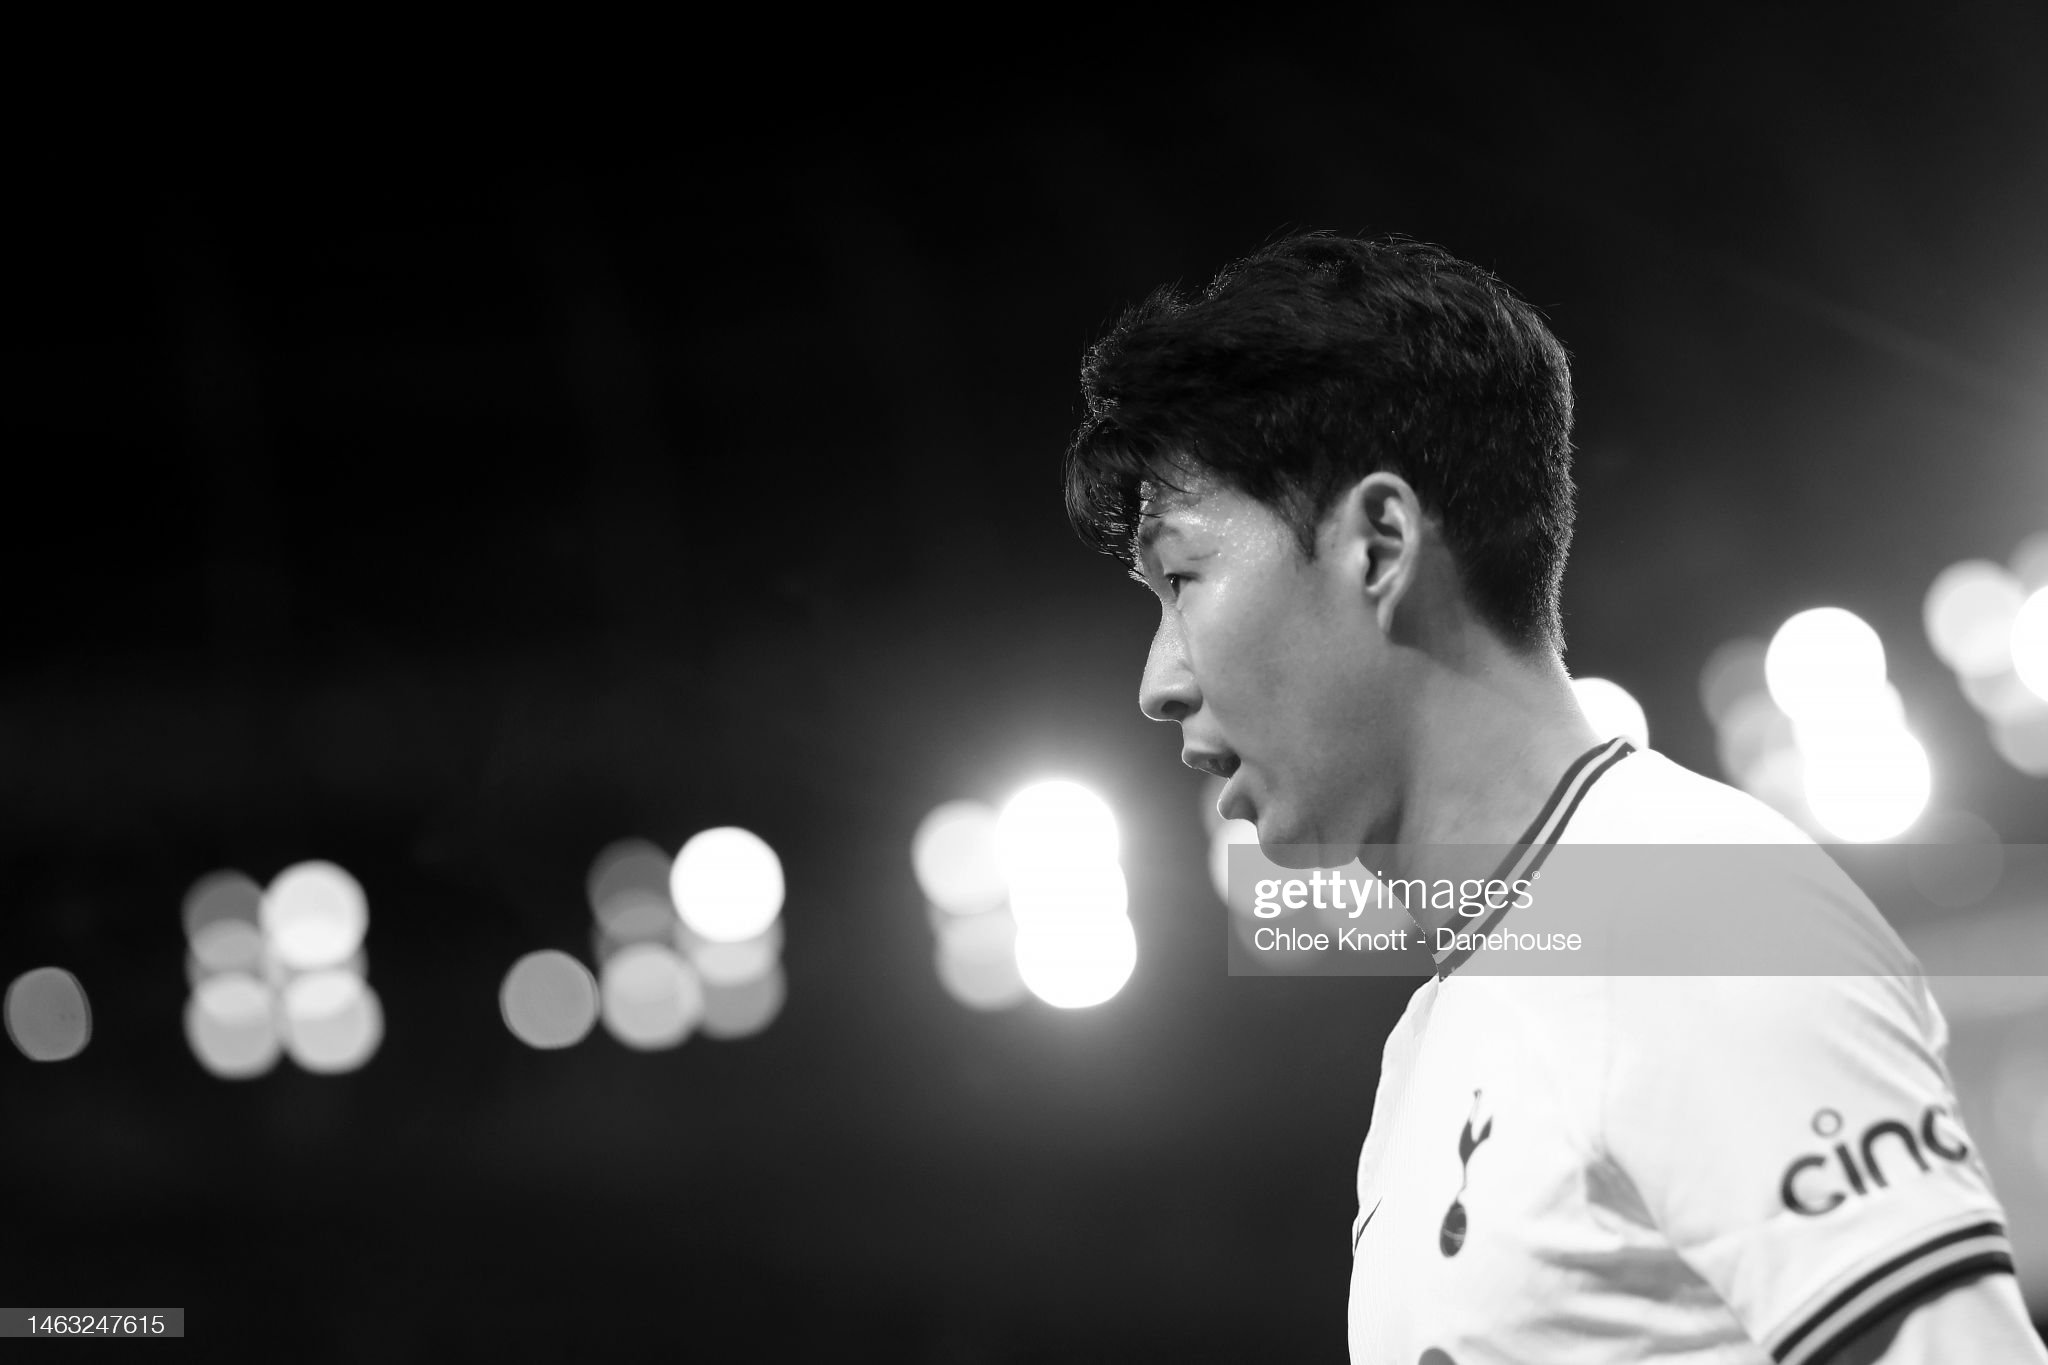 gettyimages-1463247615-2048x2048.jpg